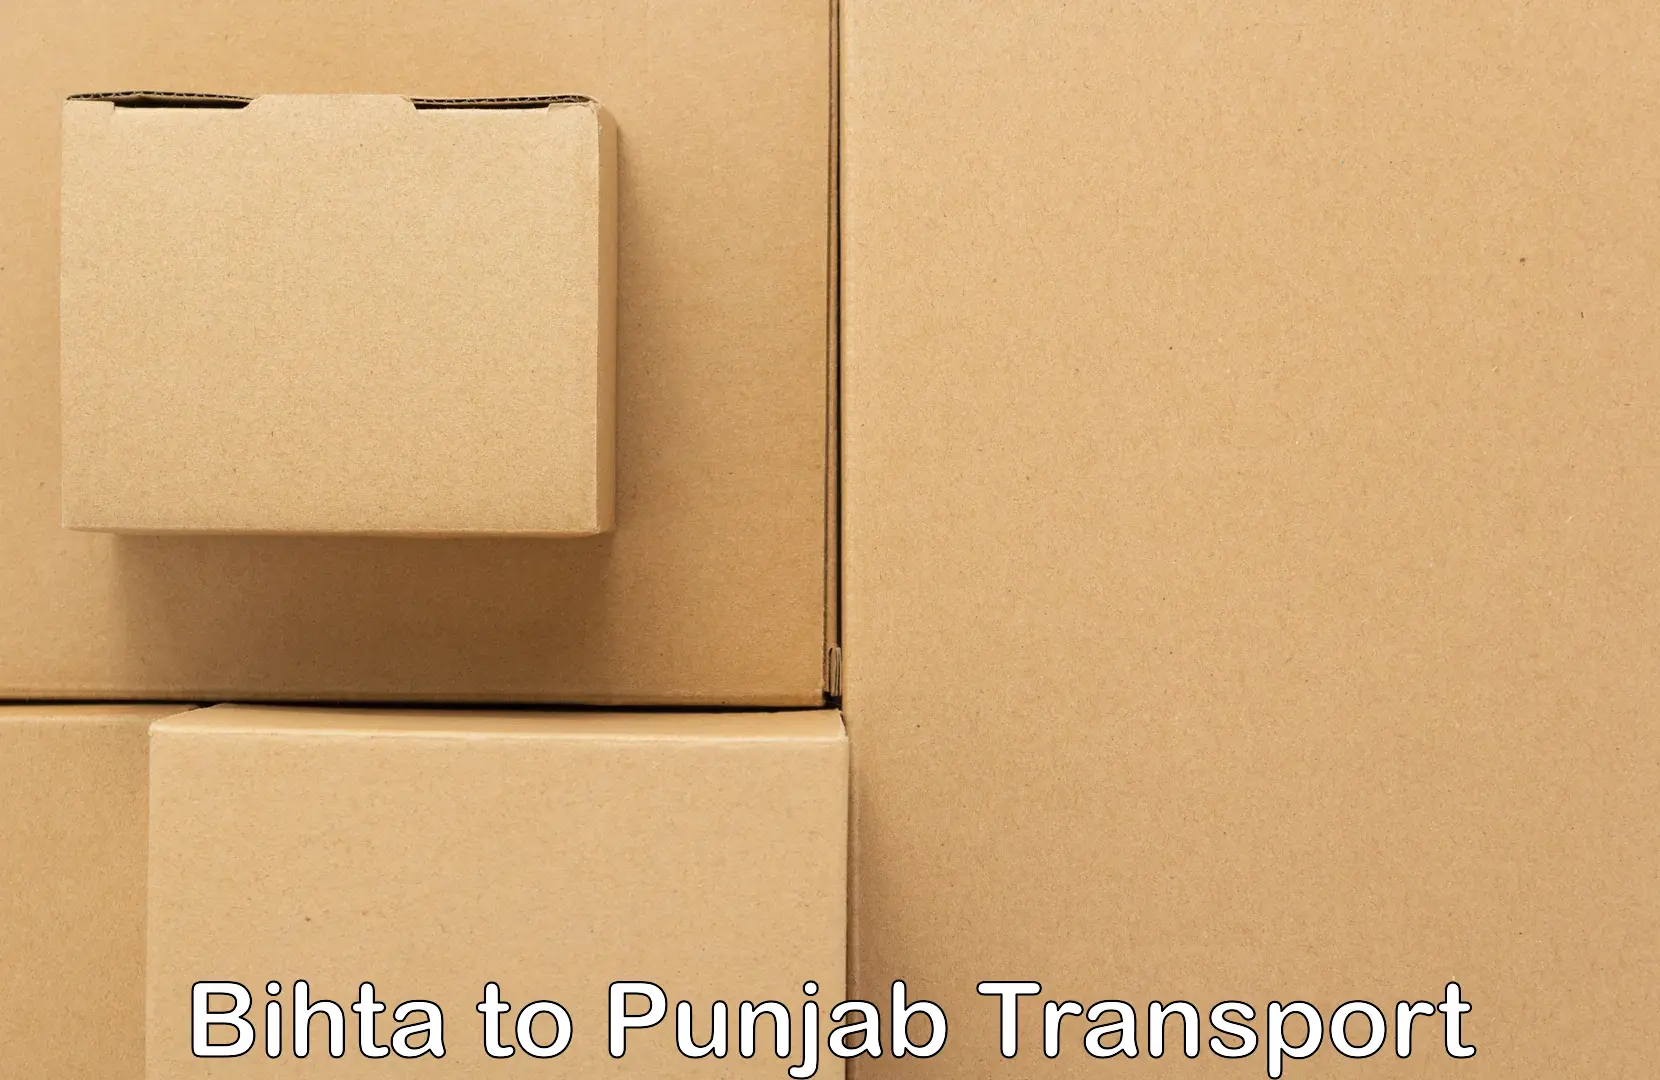 Air freight transport services in Bihta to Pathankot